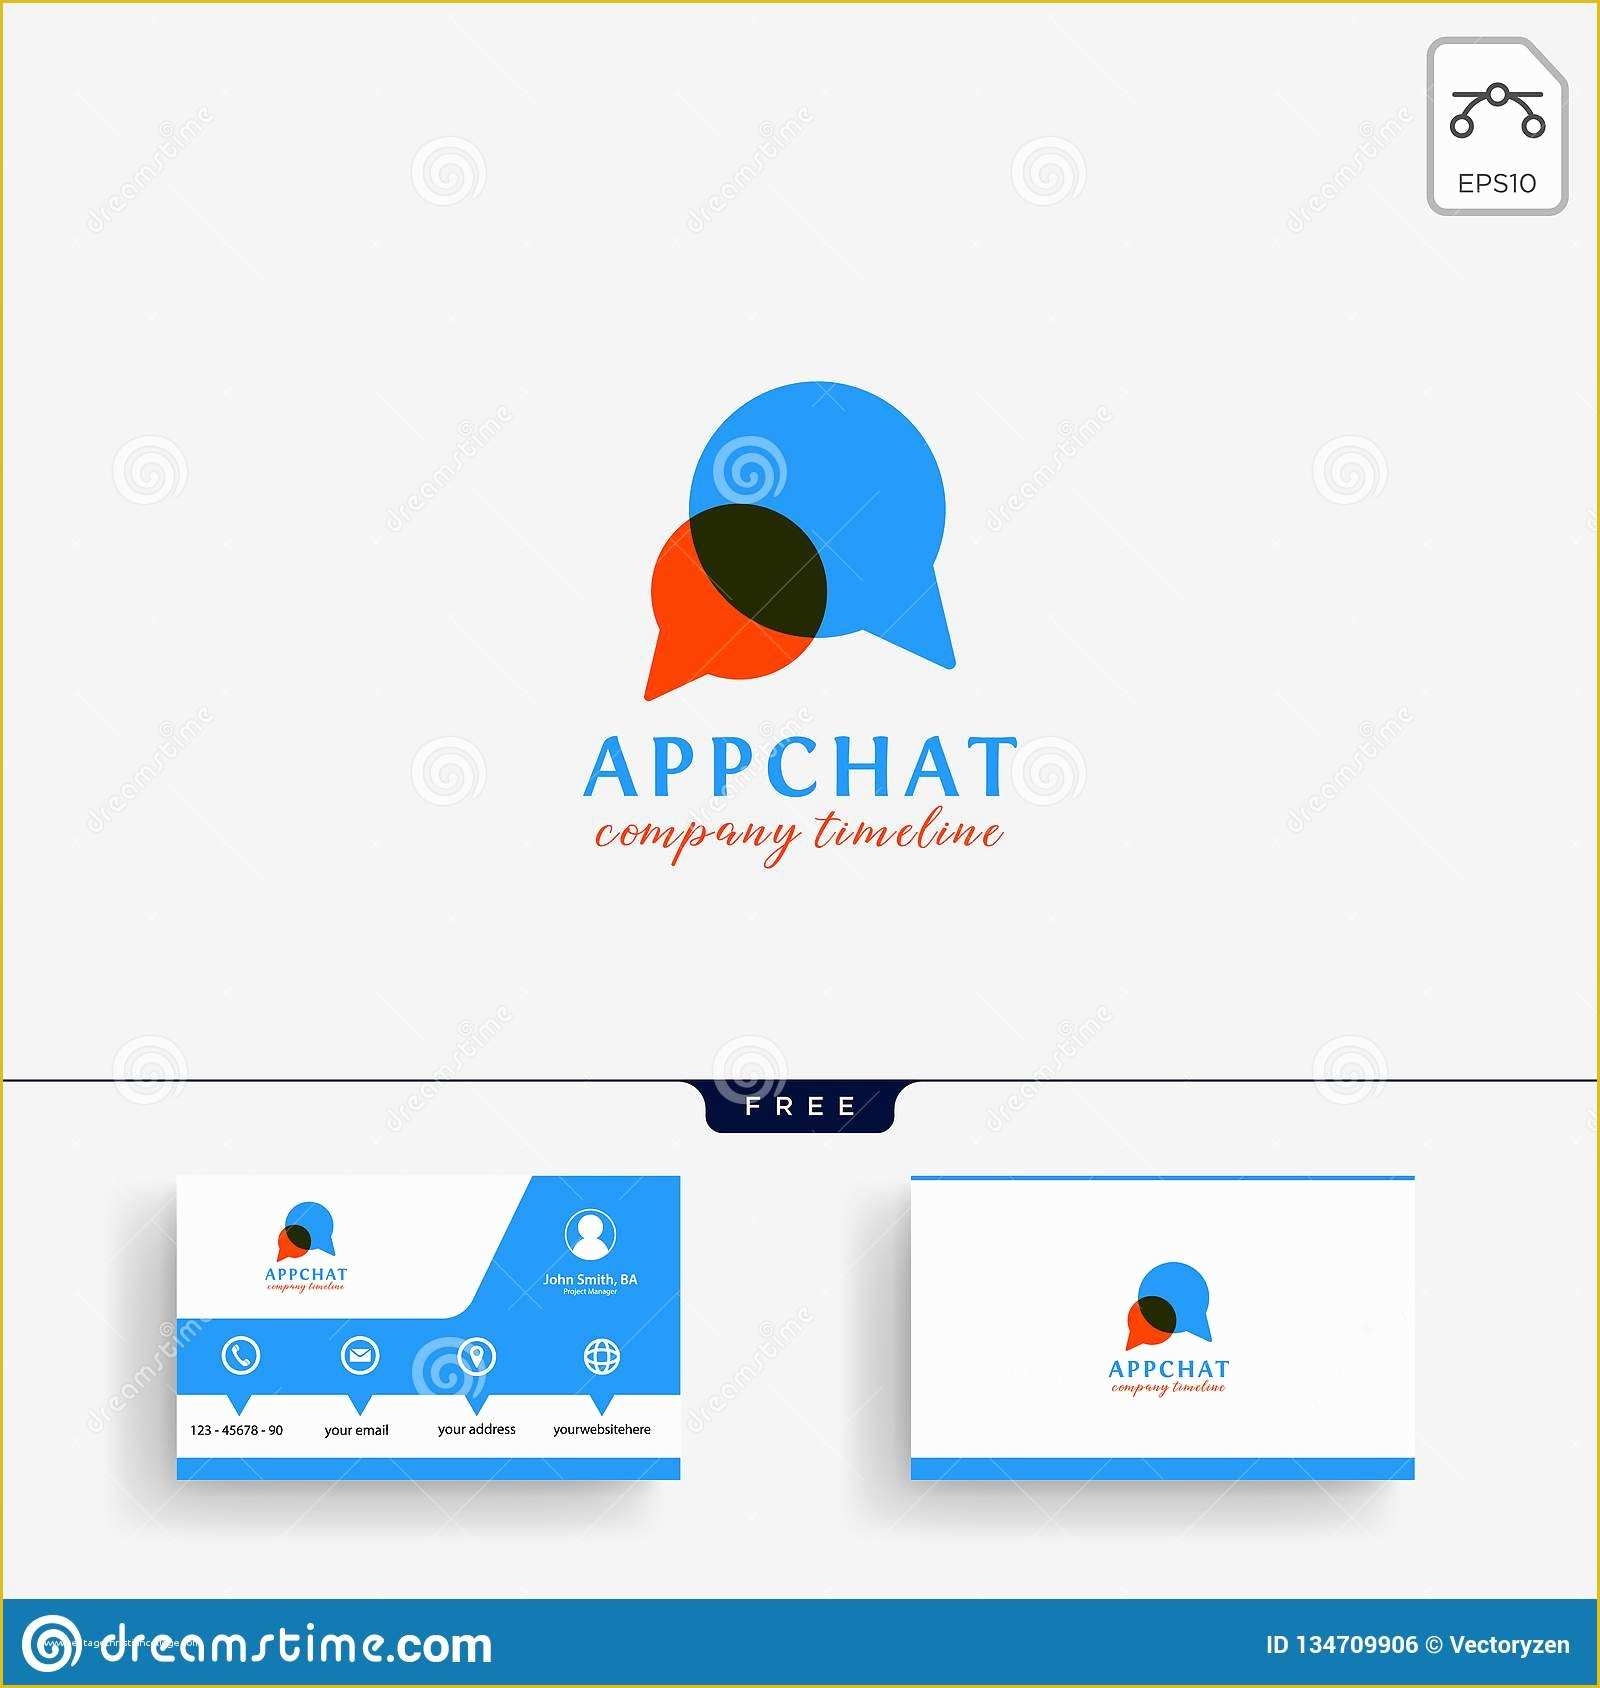 Free Chatbot Templates Of Chatbot Royalty Free Illustration